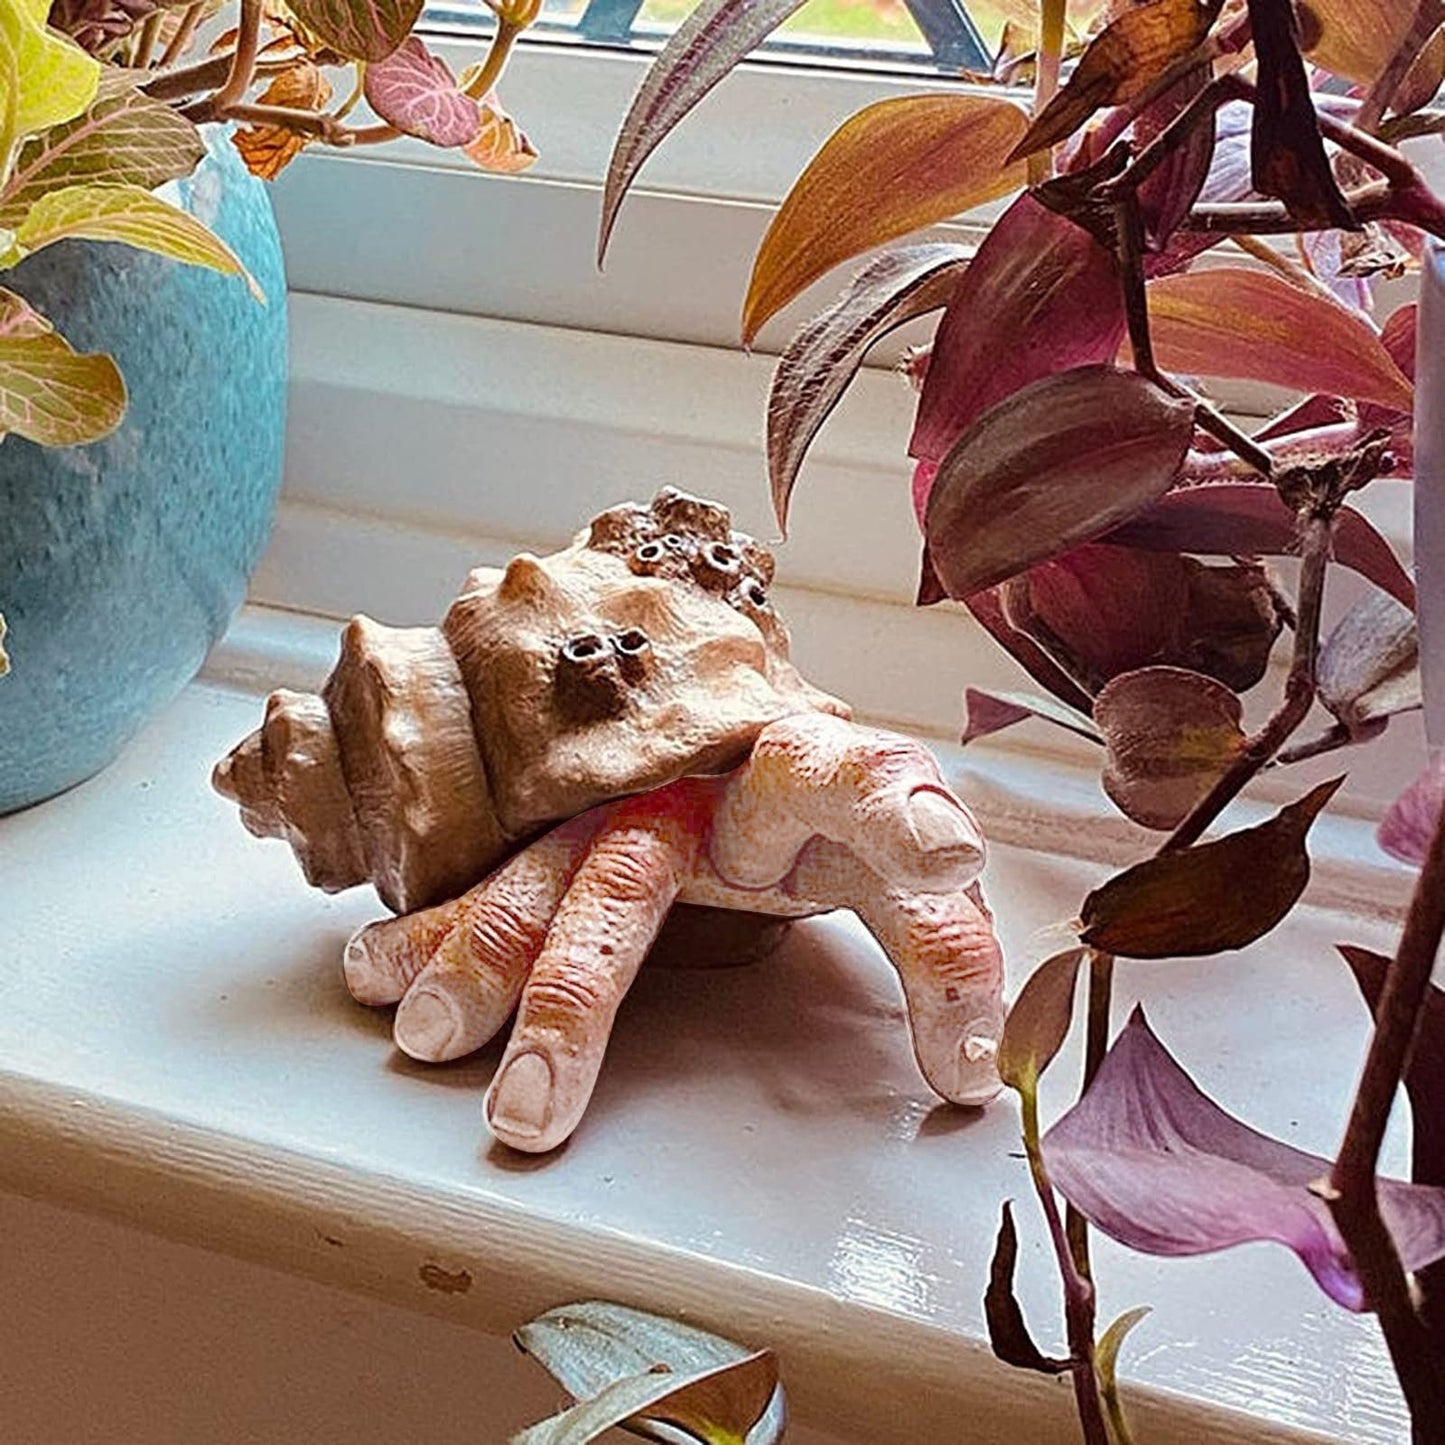 A hermit crab finger sculpture on a window sill. The sculpture has 6 fingers and appears to be walking along the window sill with one finger in the air.